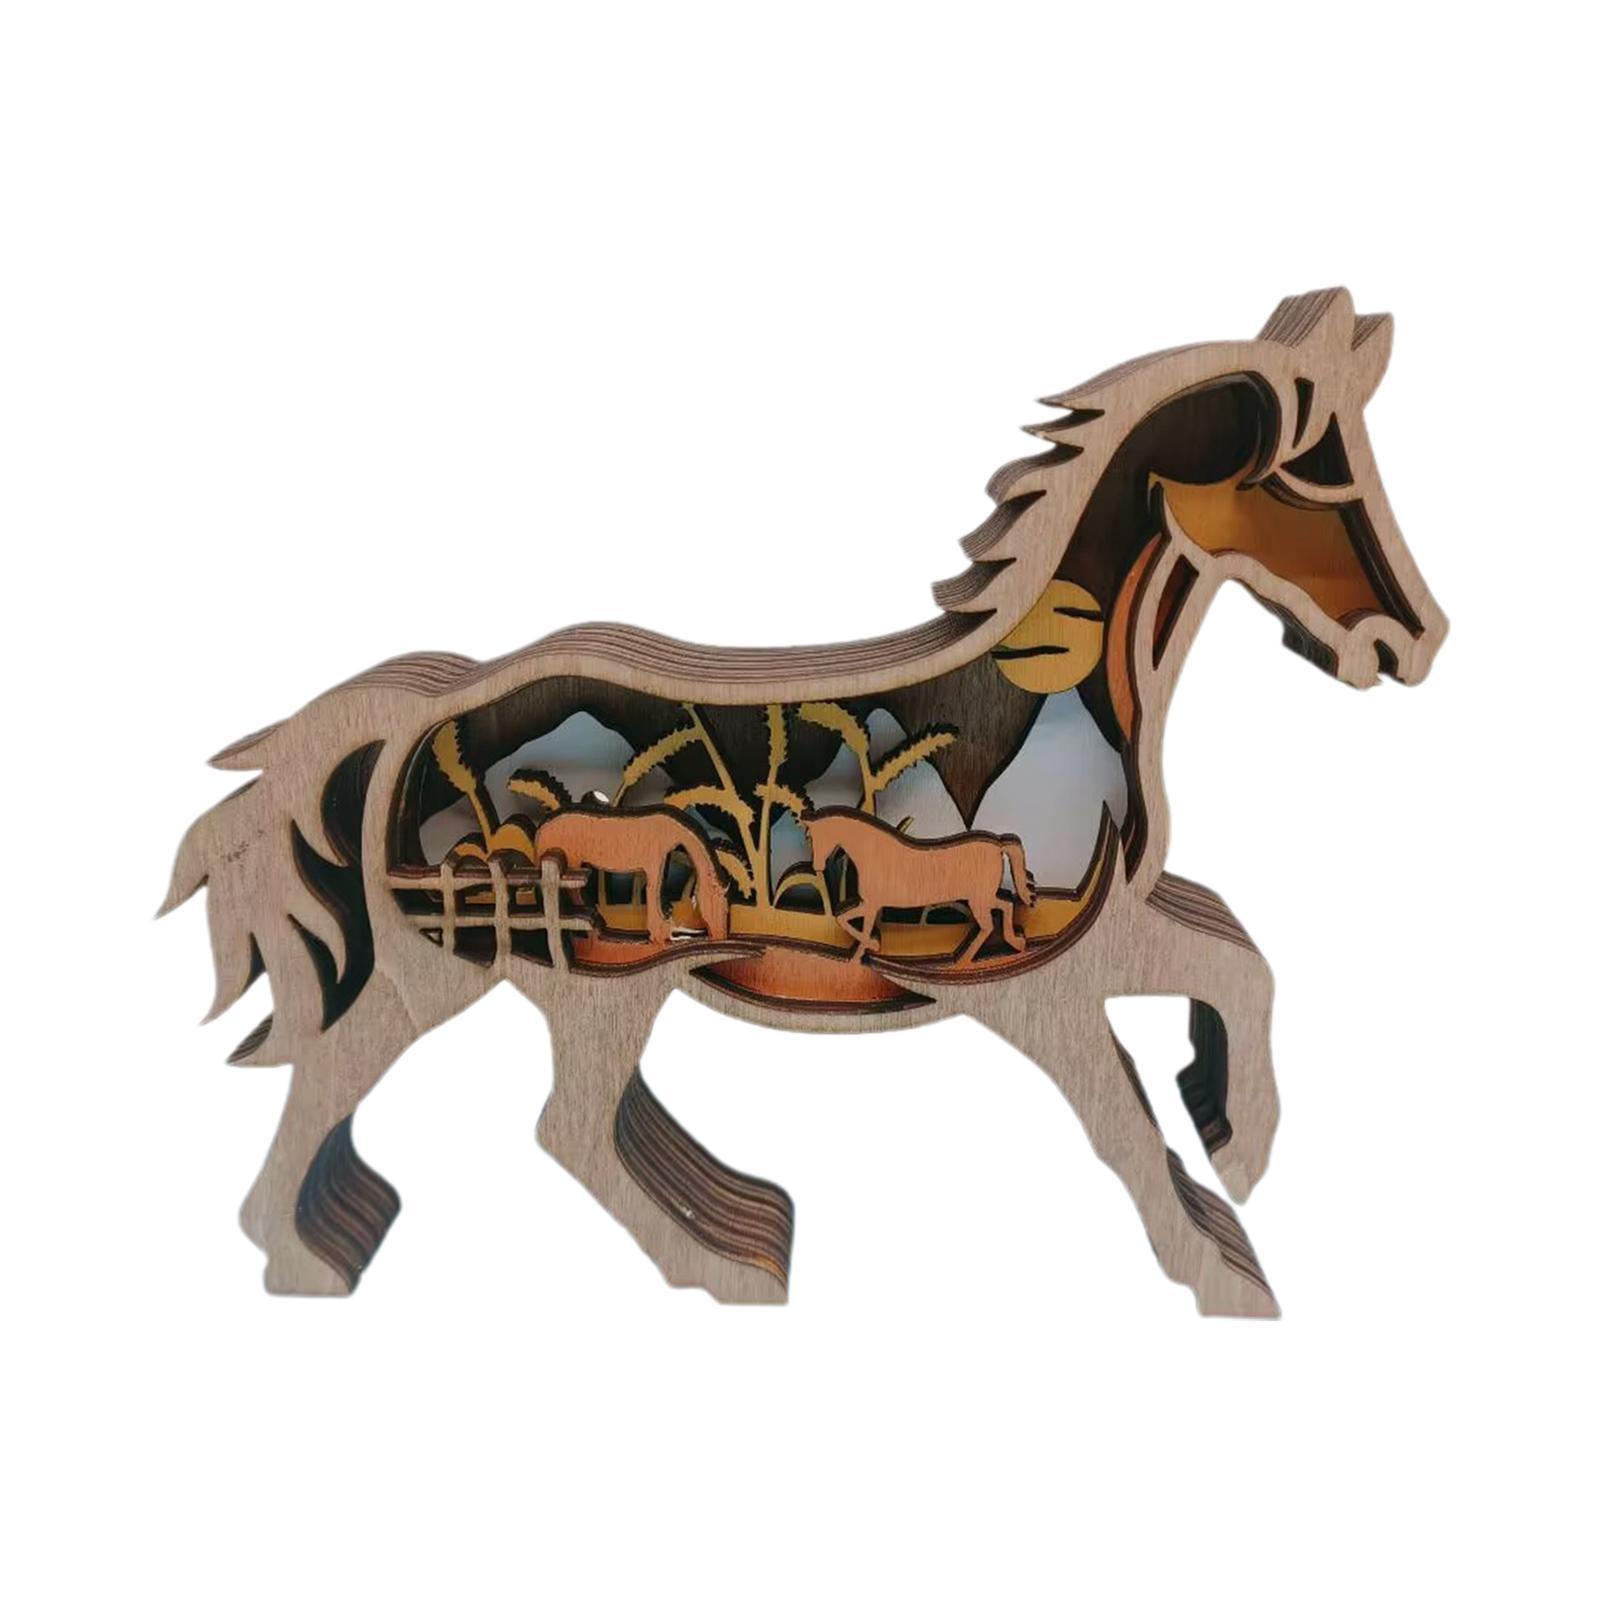 Wood Animal Horse Statue 3D Retro Hollowed Engraving Sculpture for Party